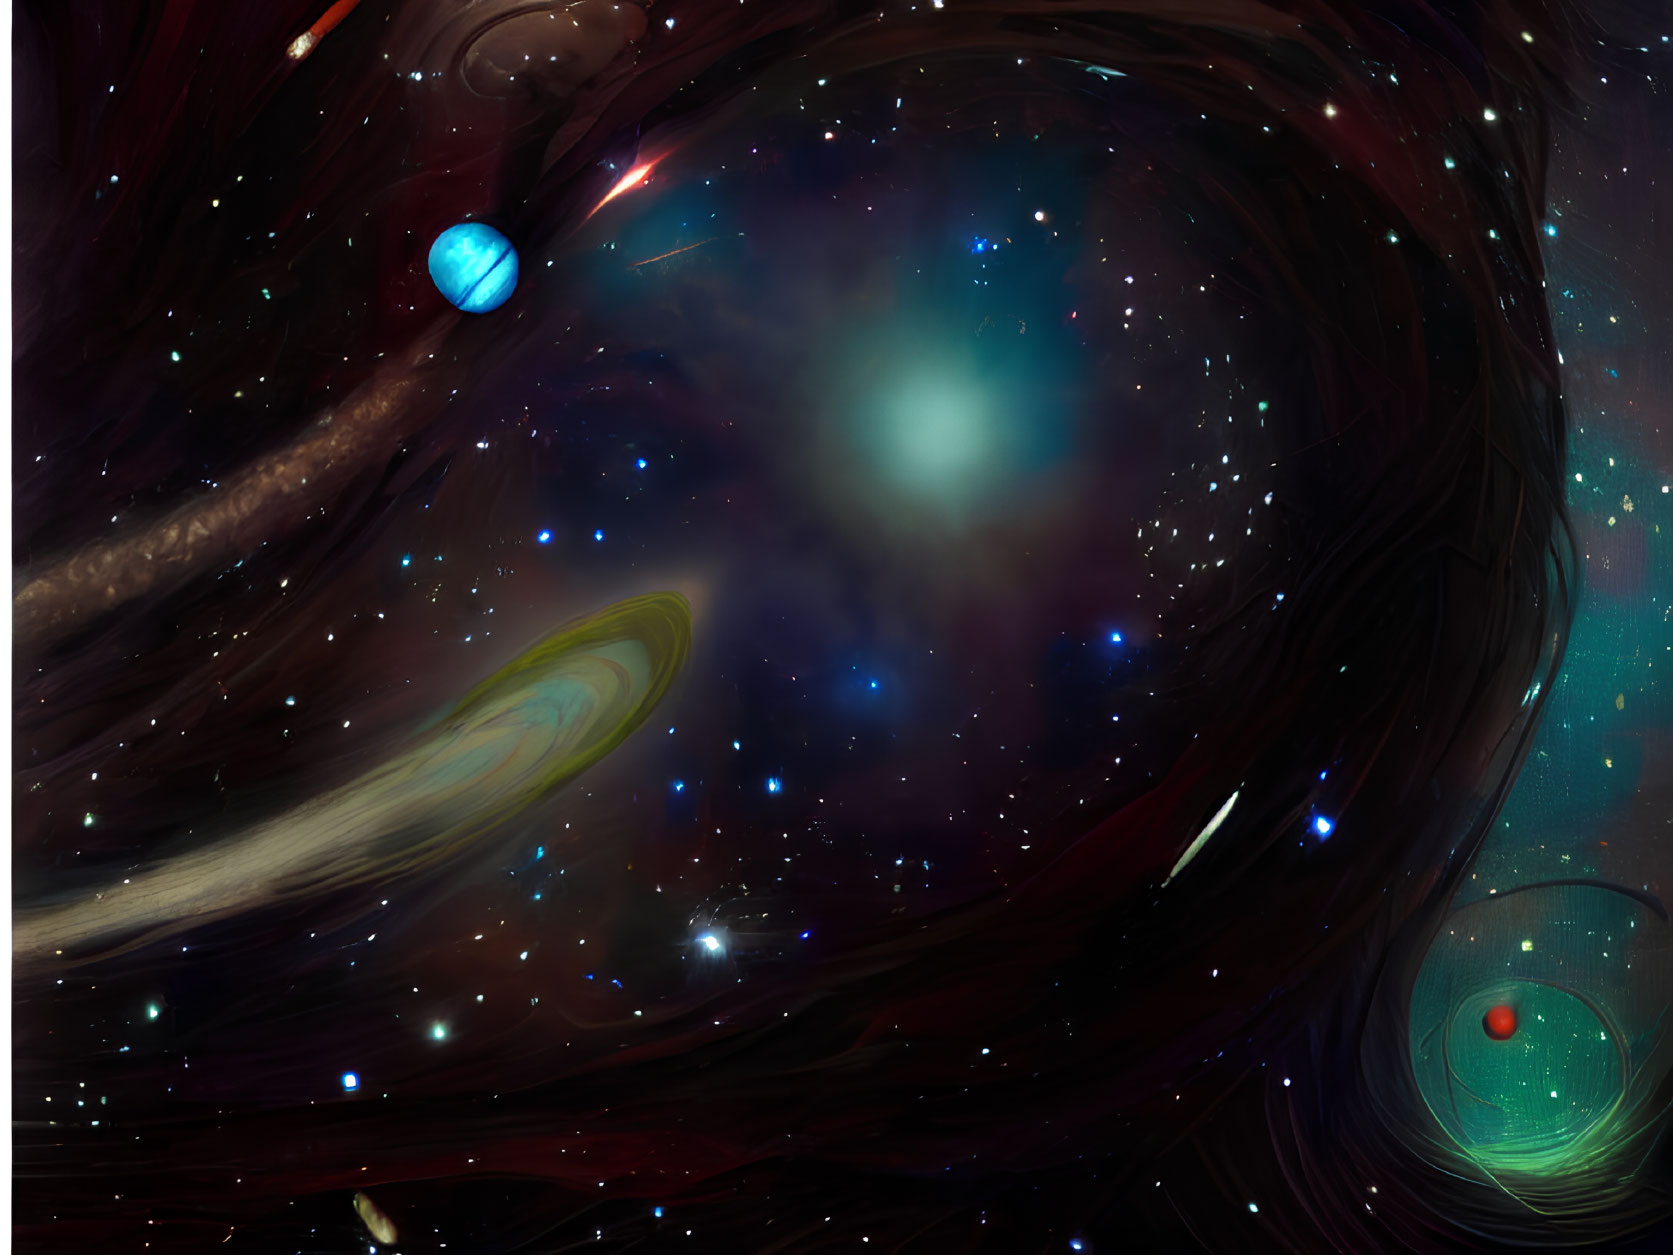 Colorful swirling galaxy with stars and planets in digital art.